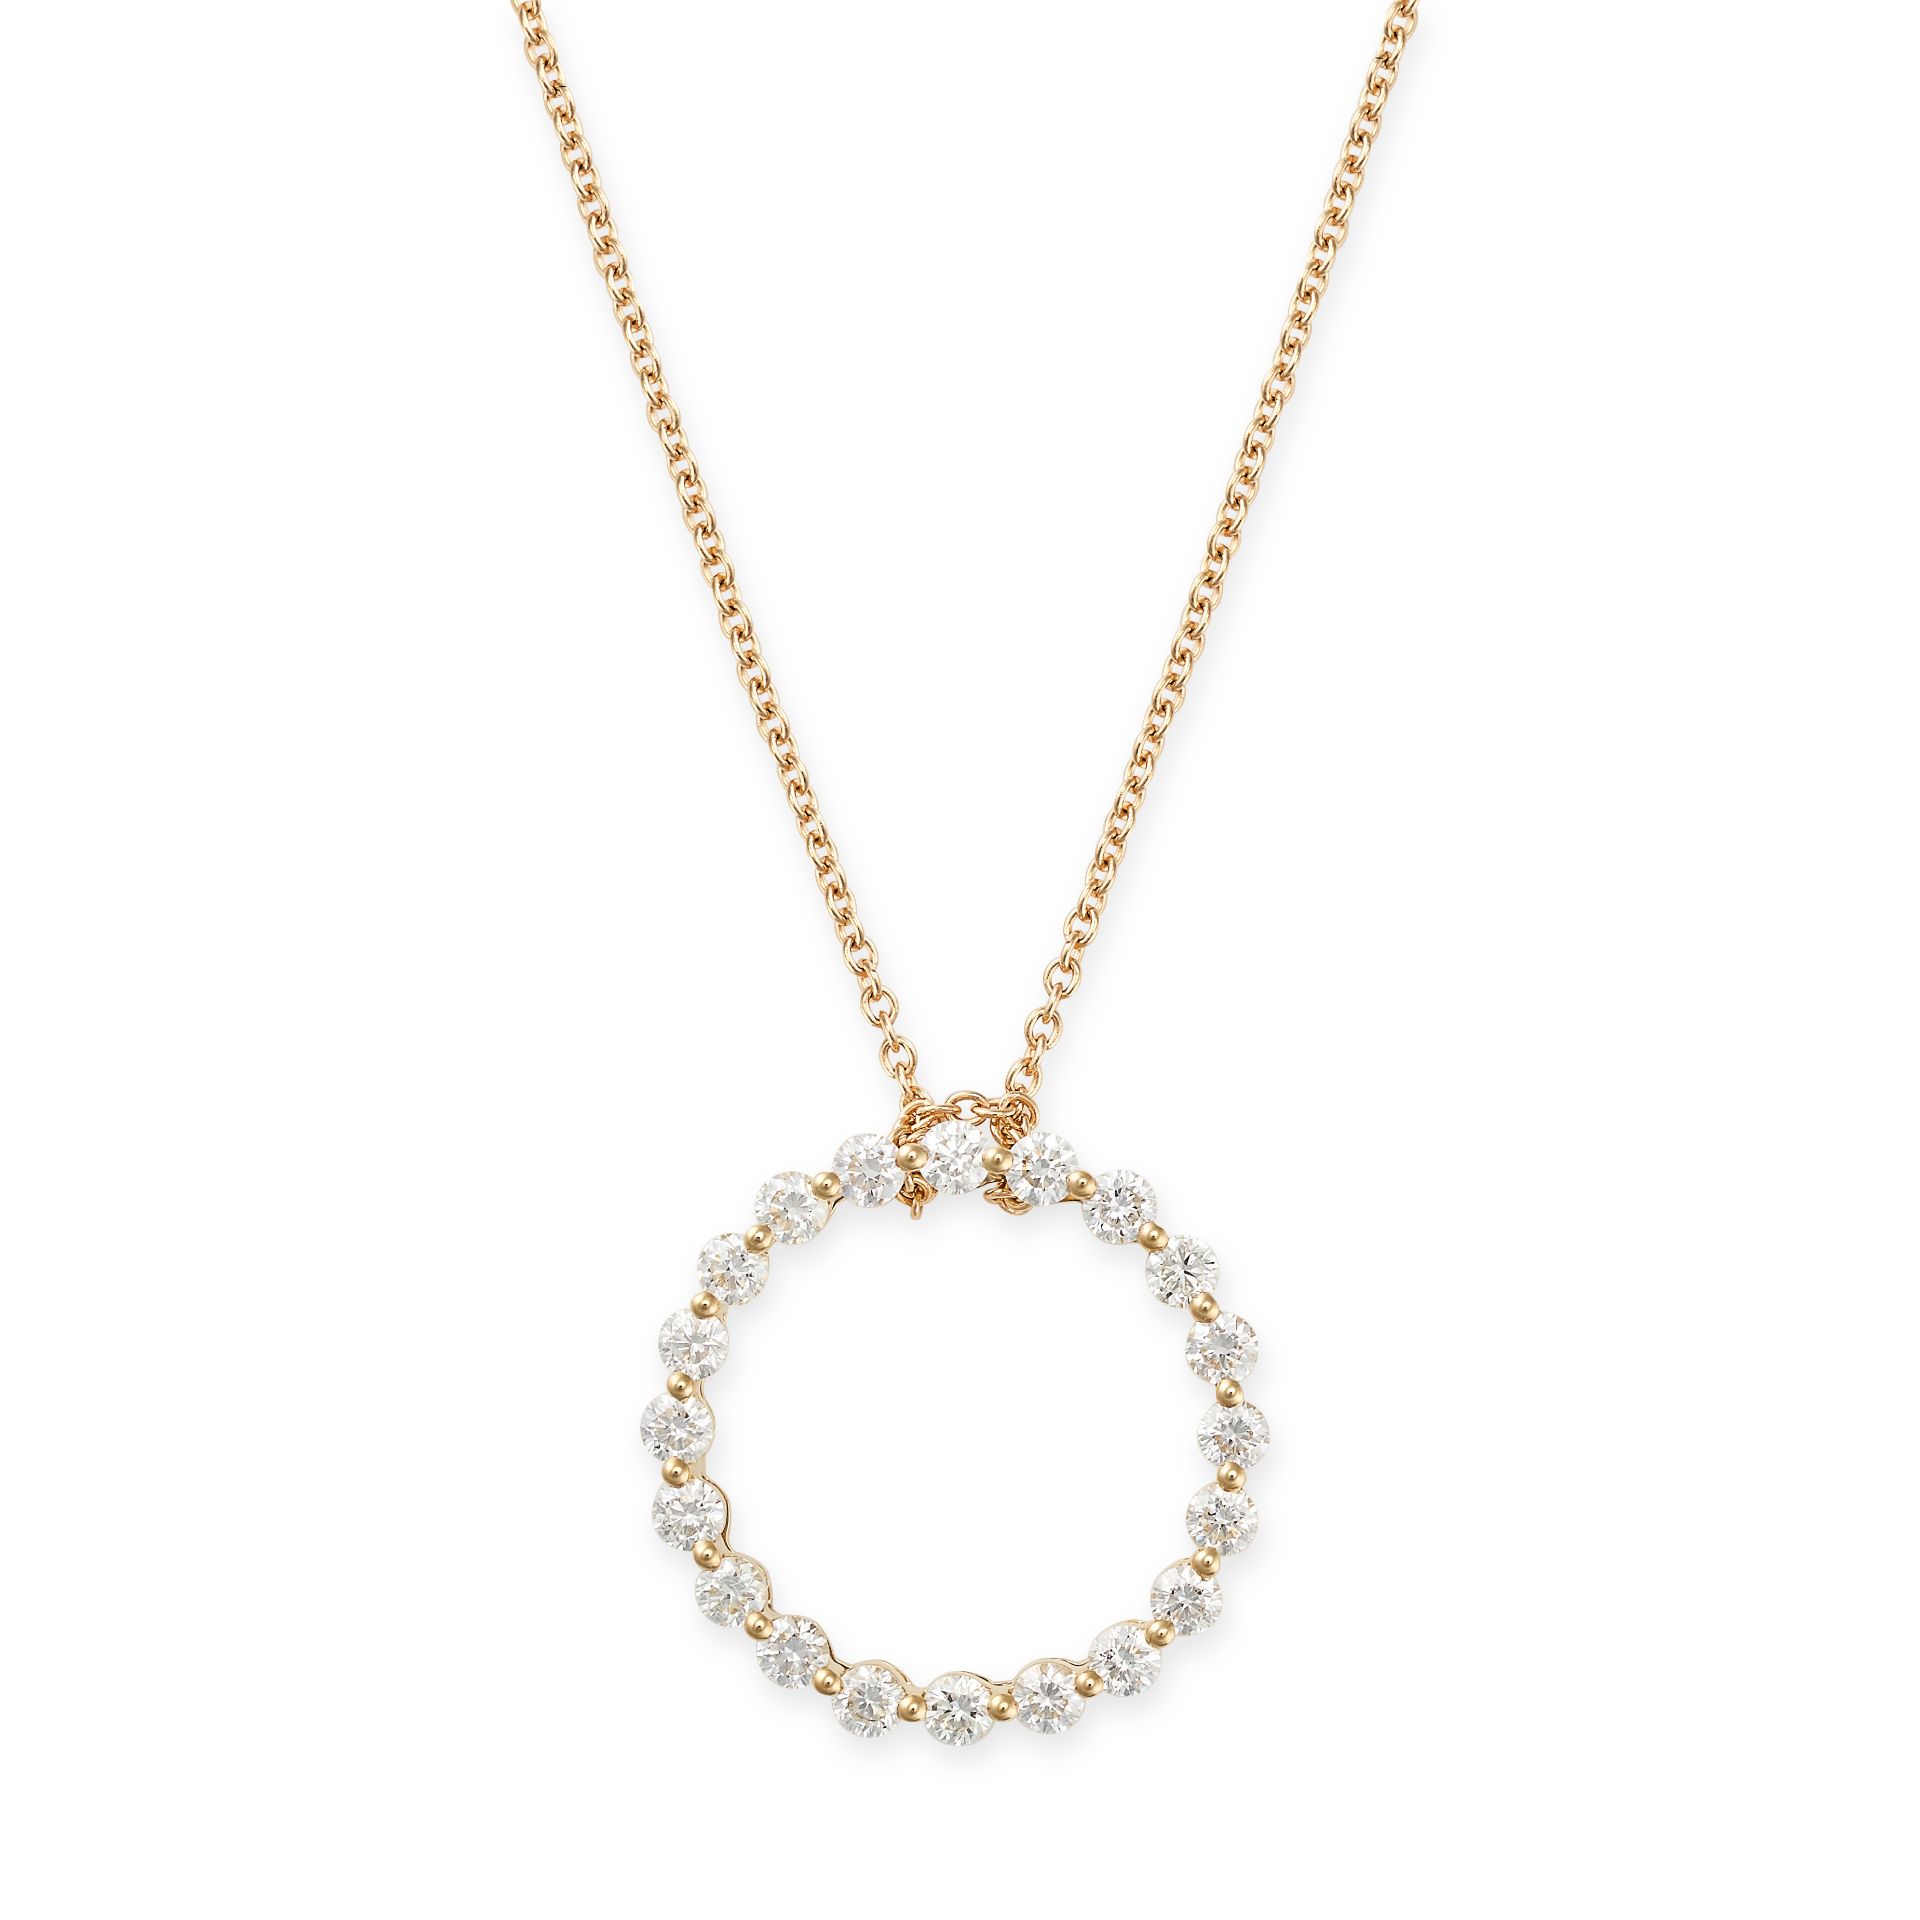 A DIAMOND OPEN CIRCLE PENDANT NECKLACE in 18ct yellow gold, the pendant designed as an openwork c...